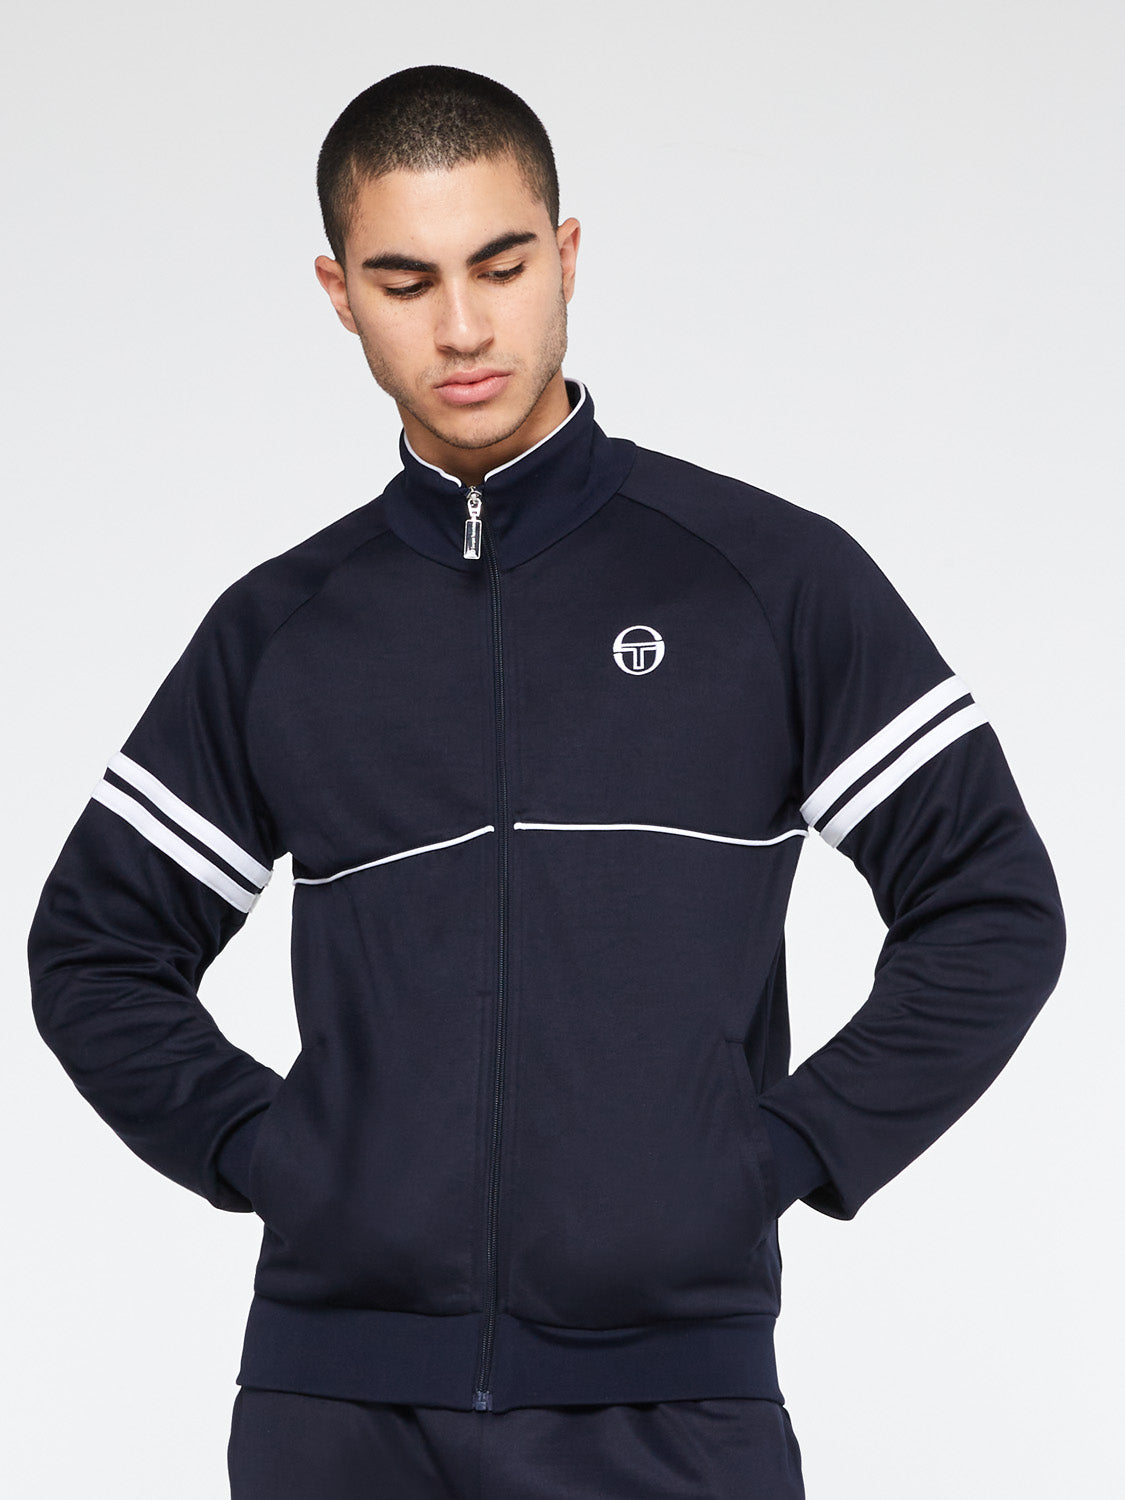 tracksuit Orion Sergio Tacchini Star Track Top in Claret & Sky warm up jacket 